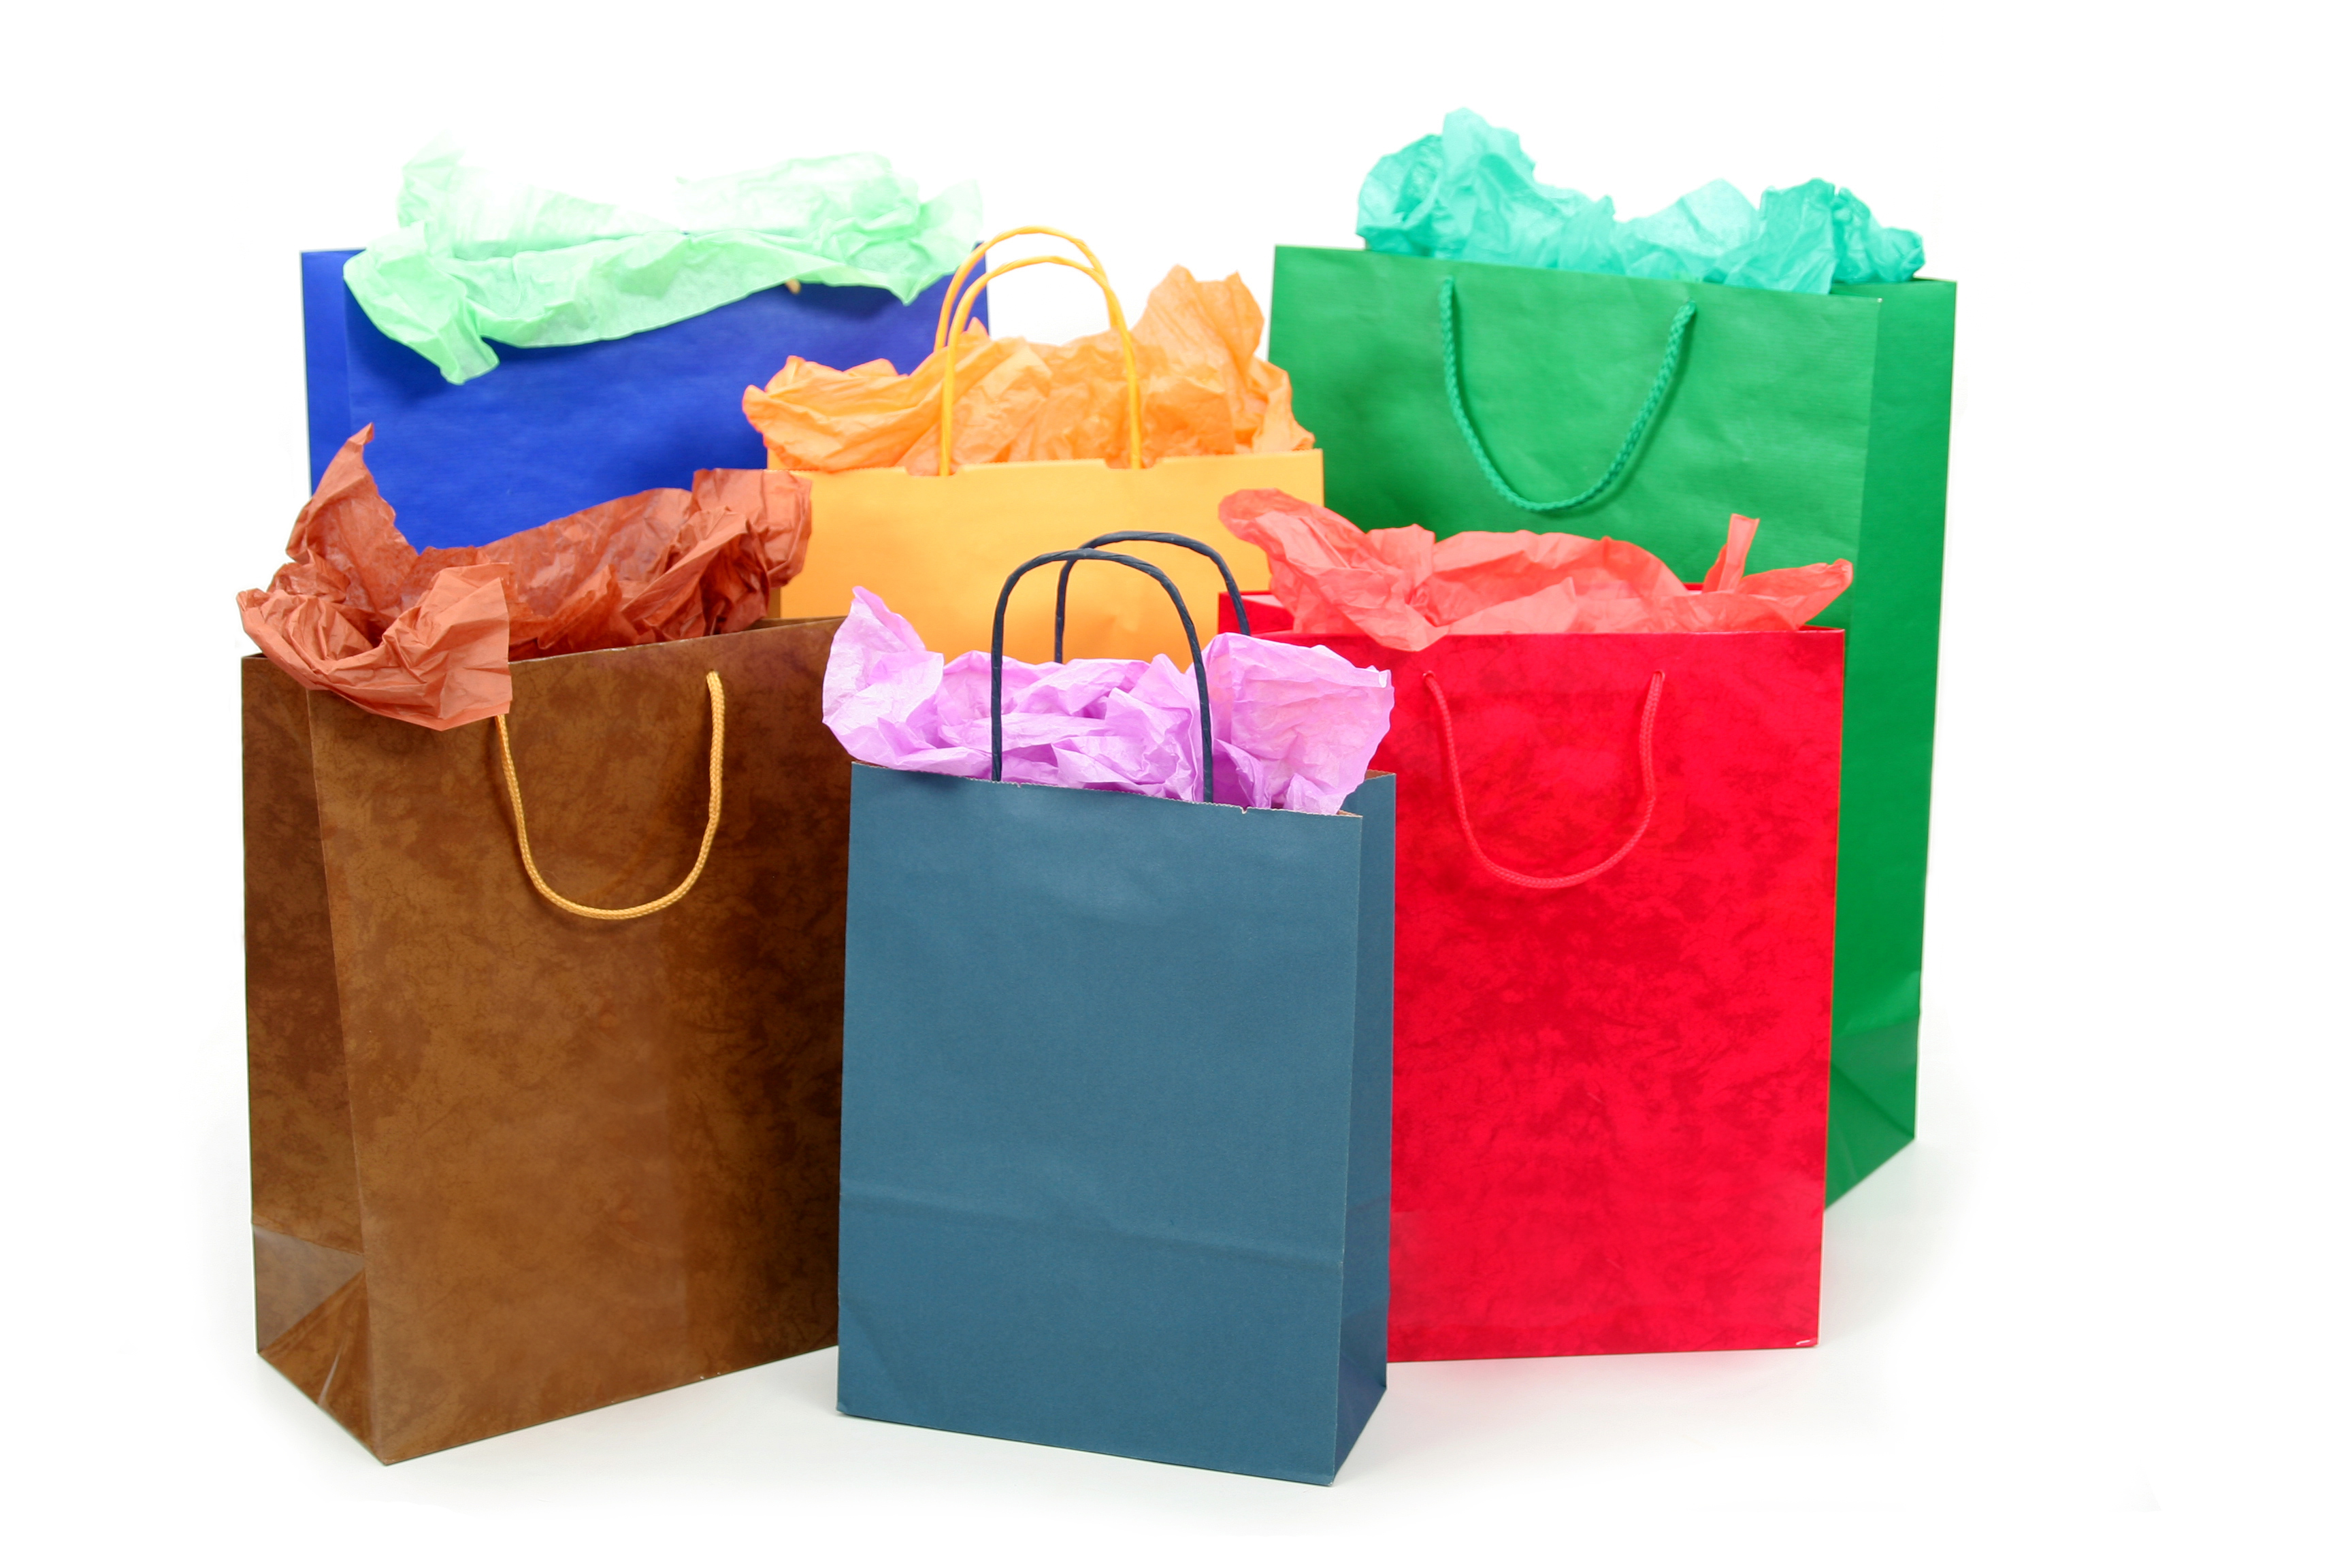 12 Shopping Bags Pictures Free Cliparts That You Can Download To You